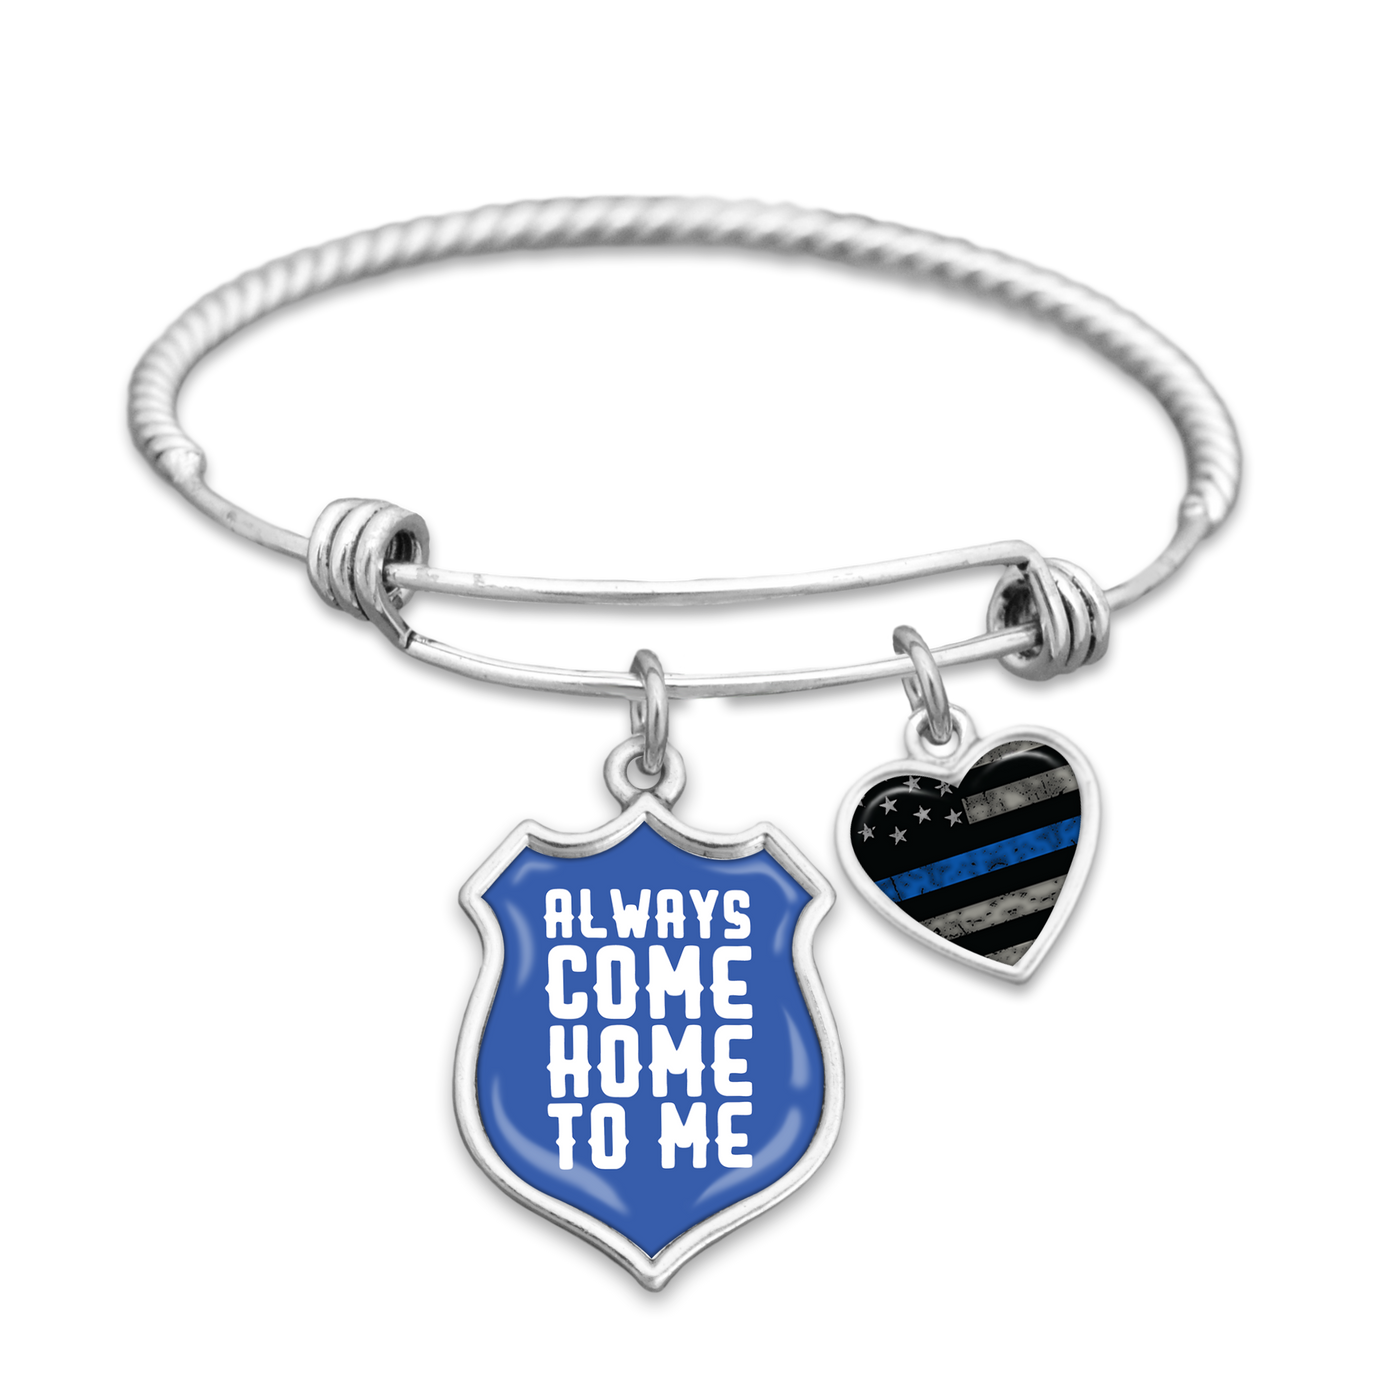 Always Come Home To Me Thin Blue Line Charm Bracelet